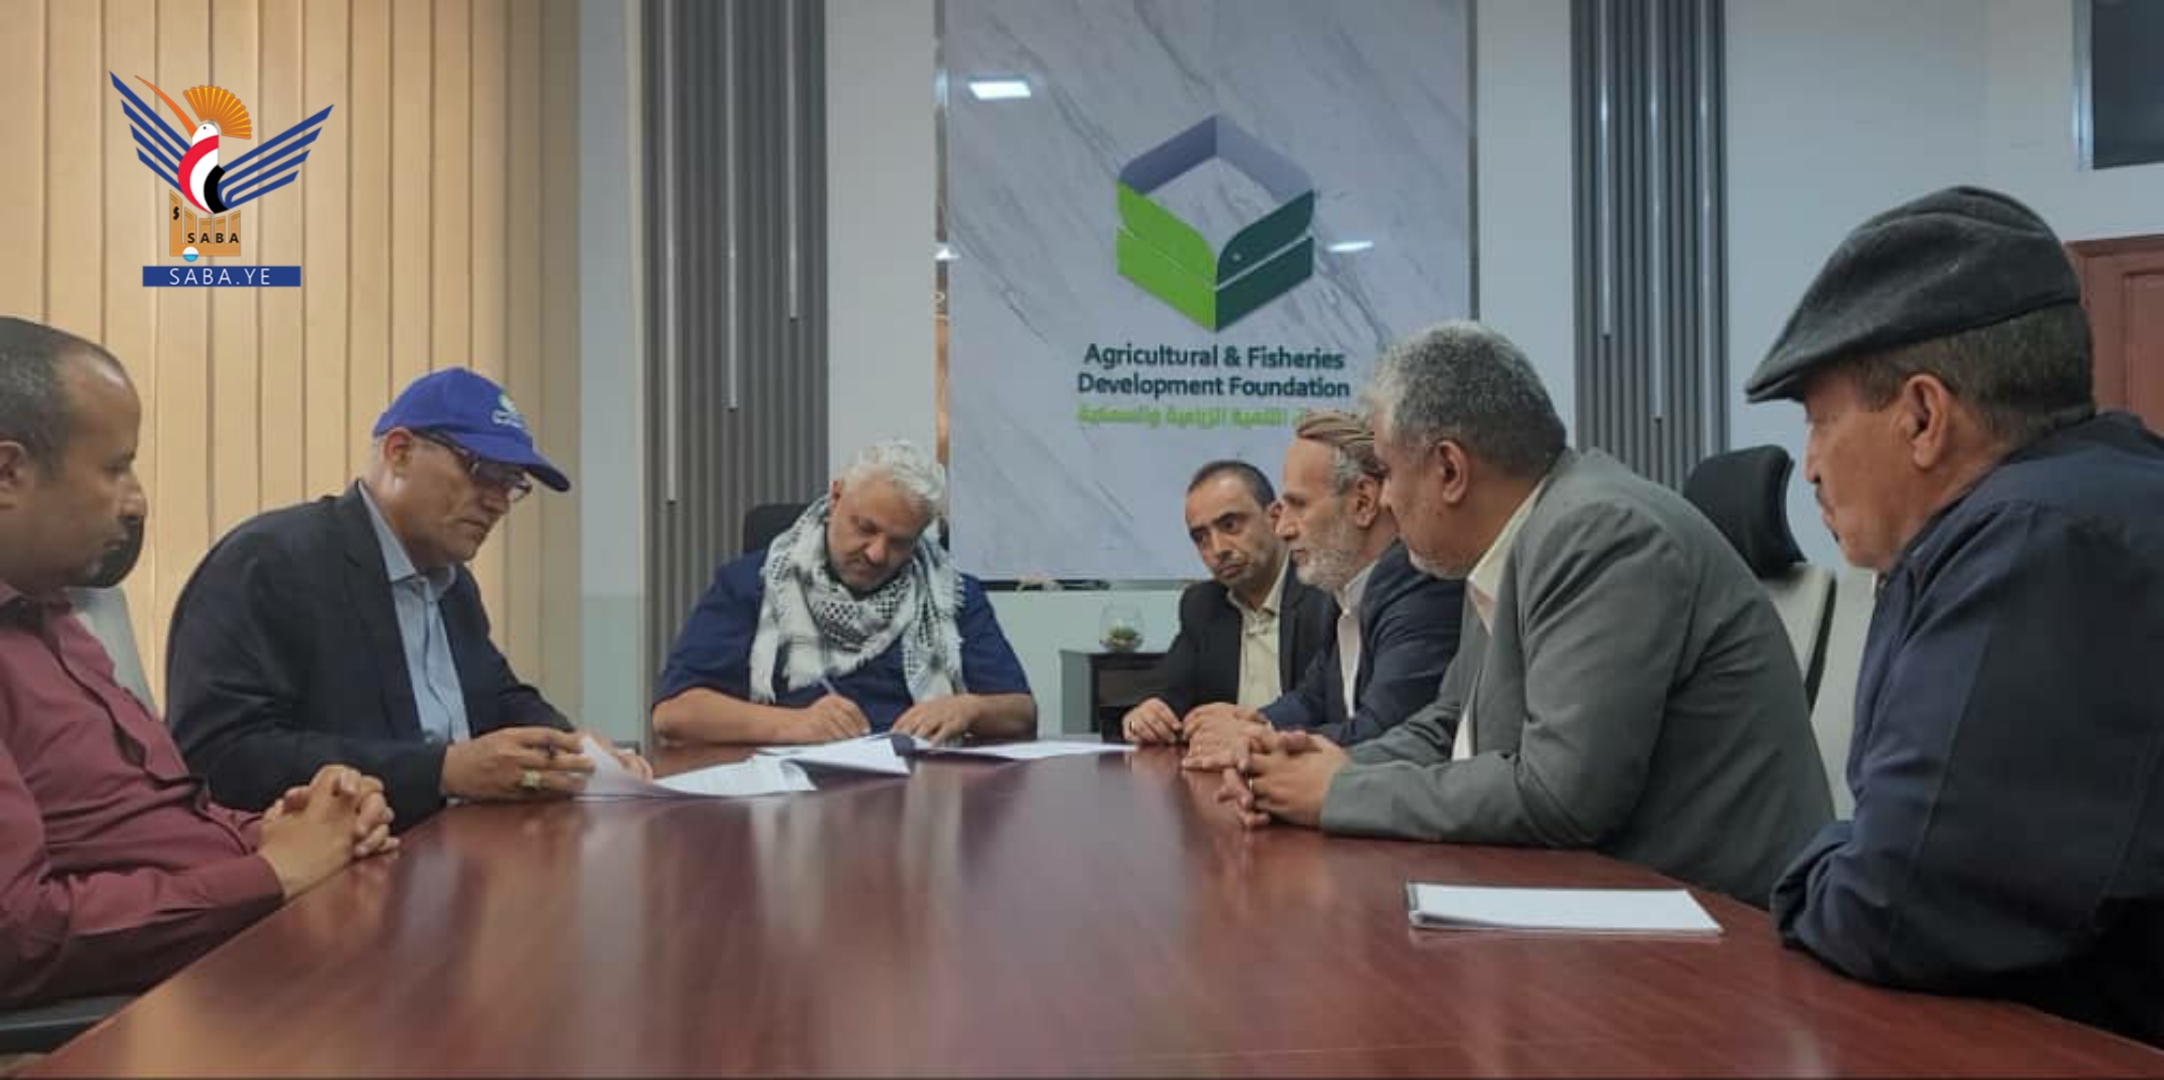 Signing agreement to finance agricultural extension programs funded by Agricultural Production Promotion Fund